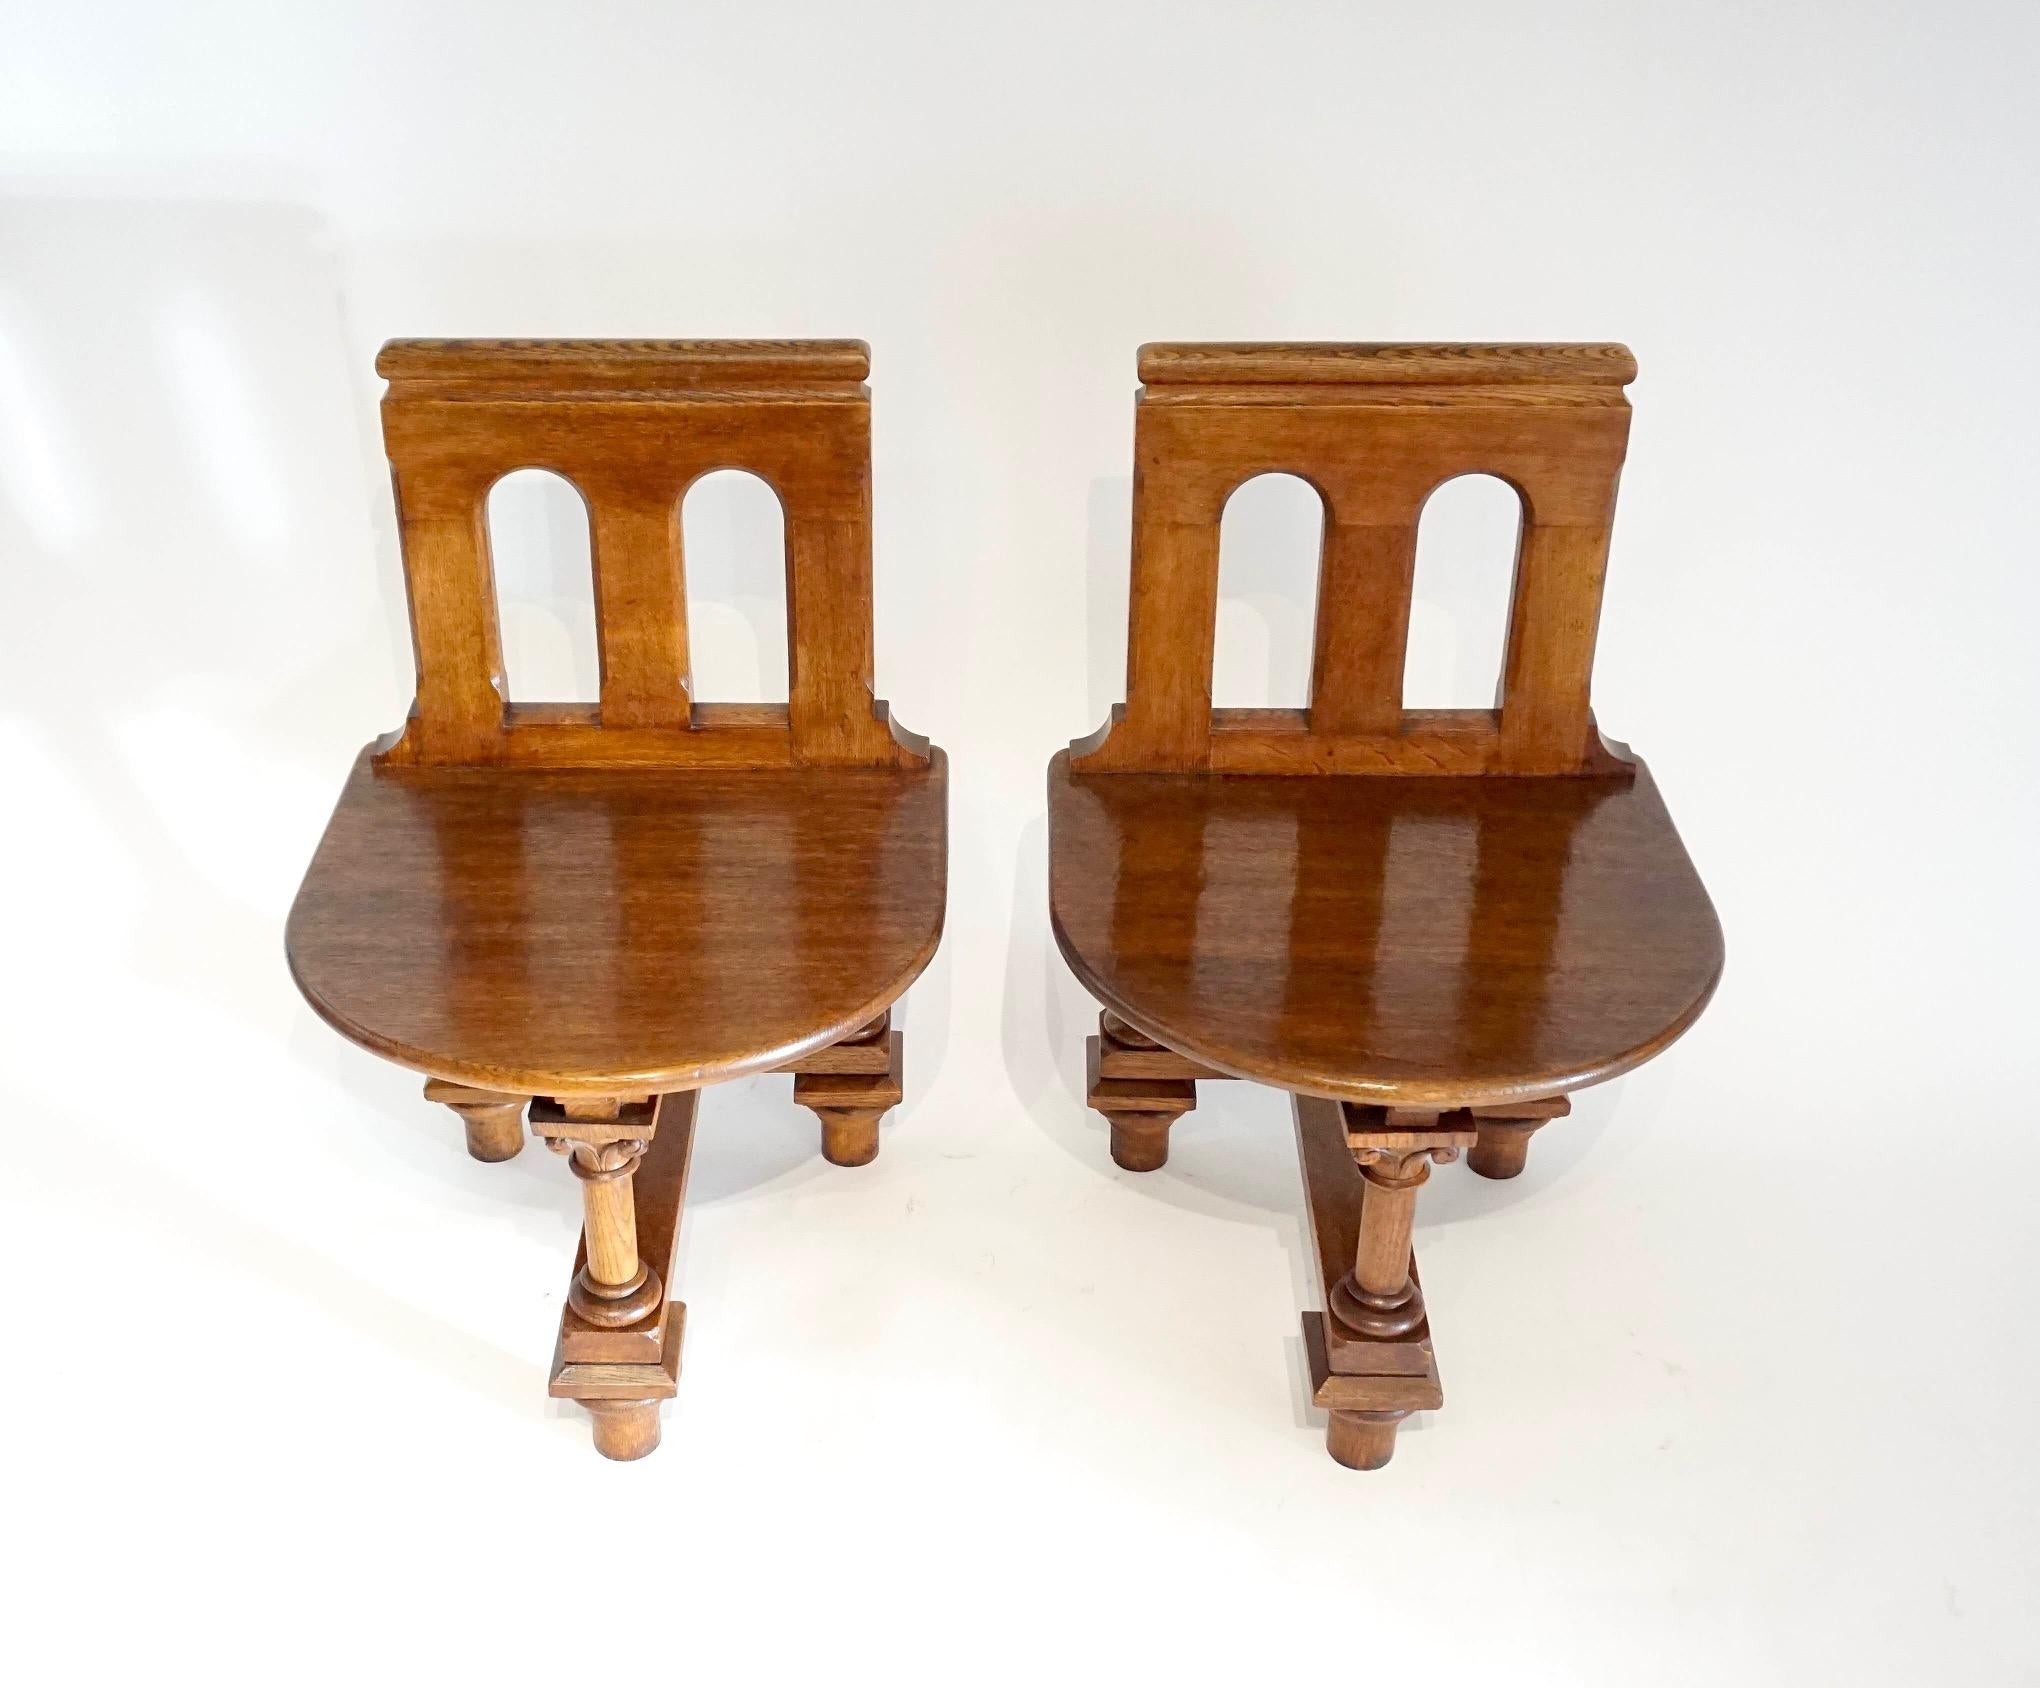 20th Century French Romanesque Revival Oak Hall Seats or Chairs, circa 1900 For Sale